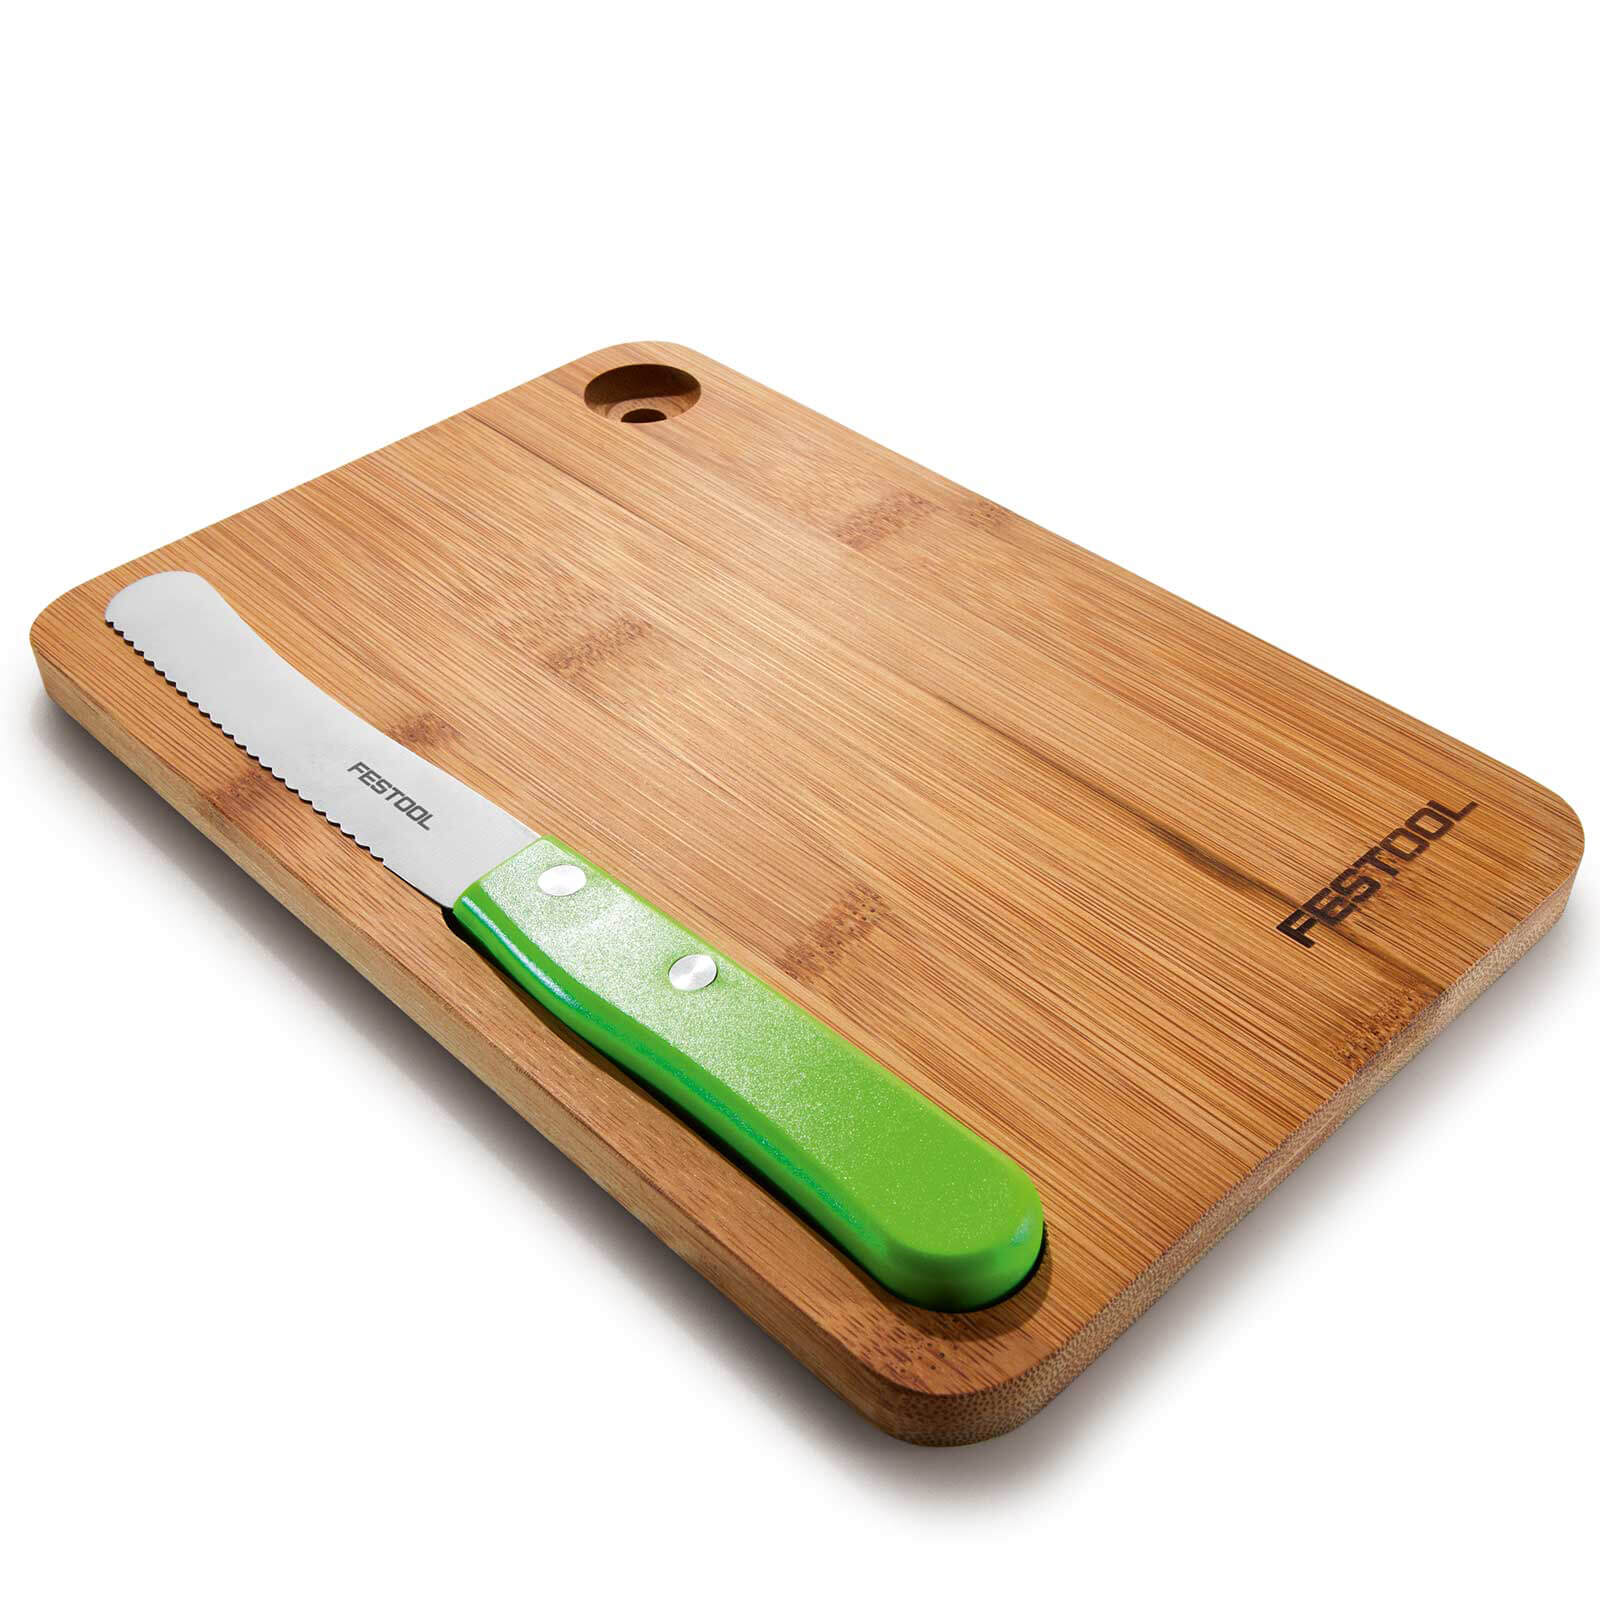 Photo of Festool Fan Knife And Magnetic Chopping Board Snack Set